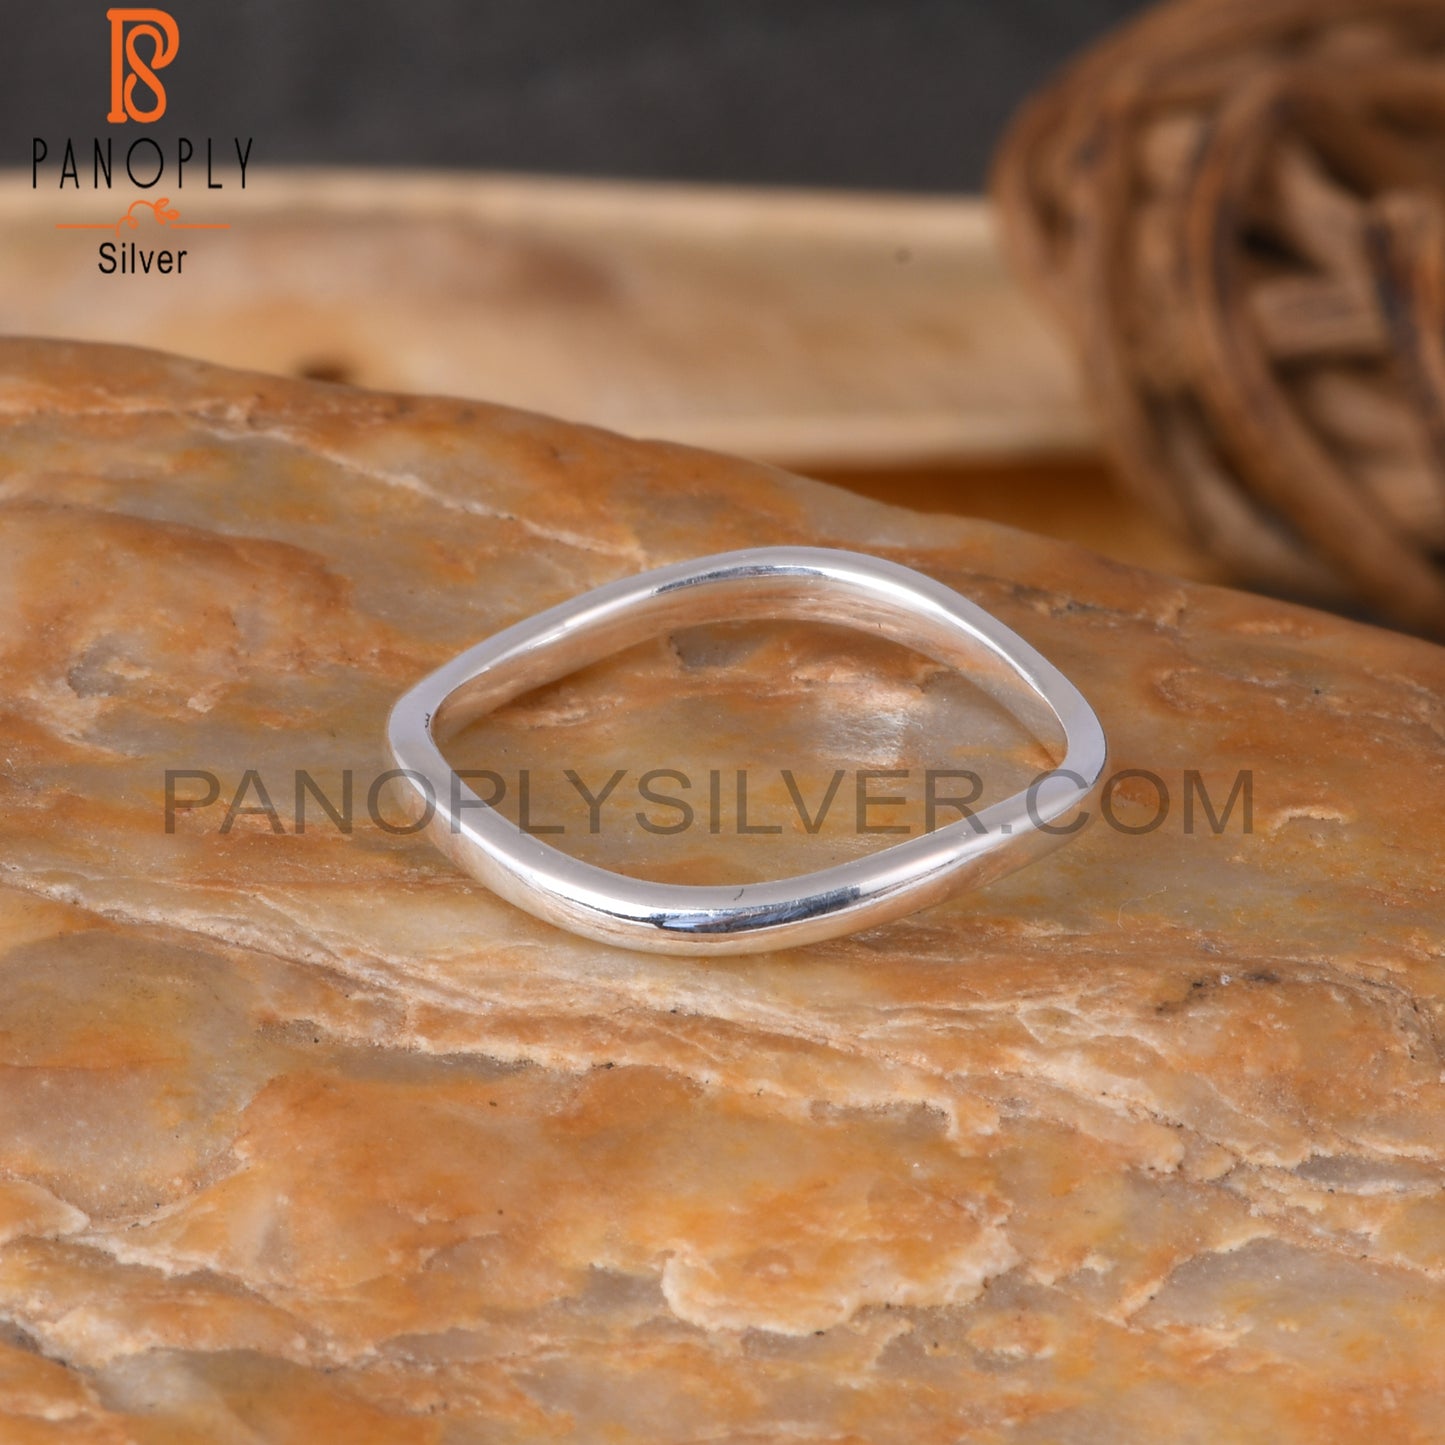 Handmade 925 Sterling Silver Stackable Ring Gift For Her